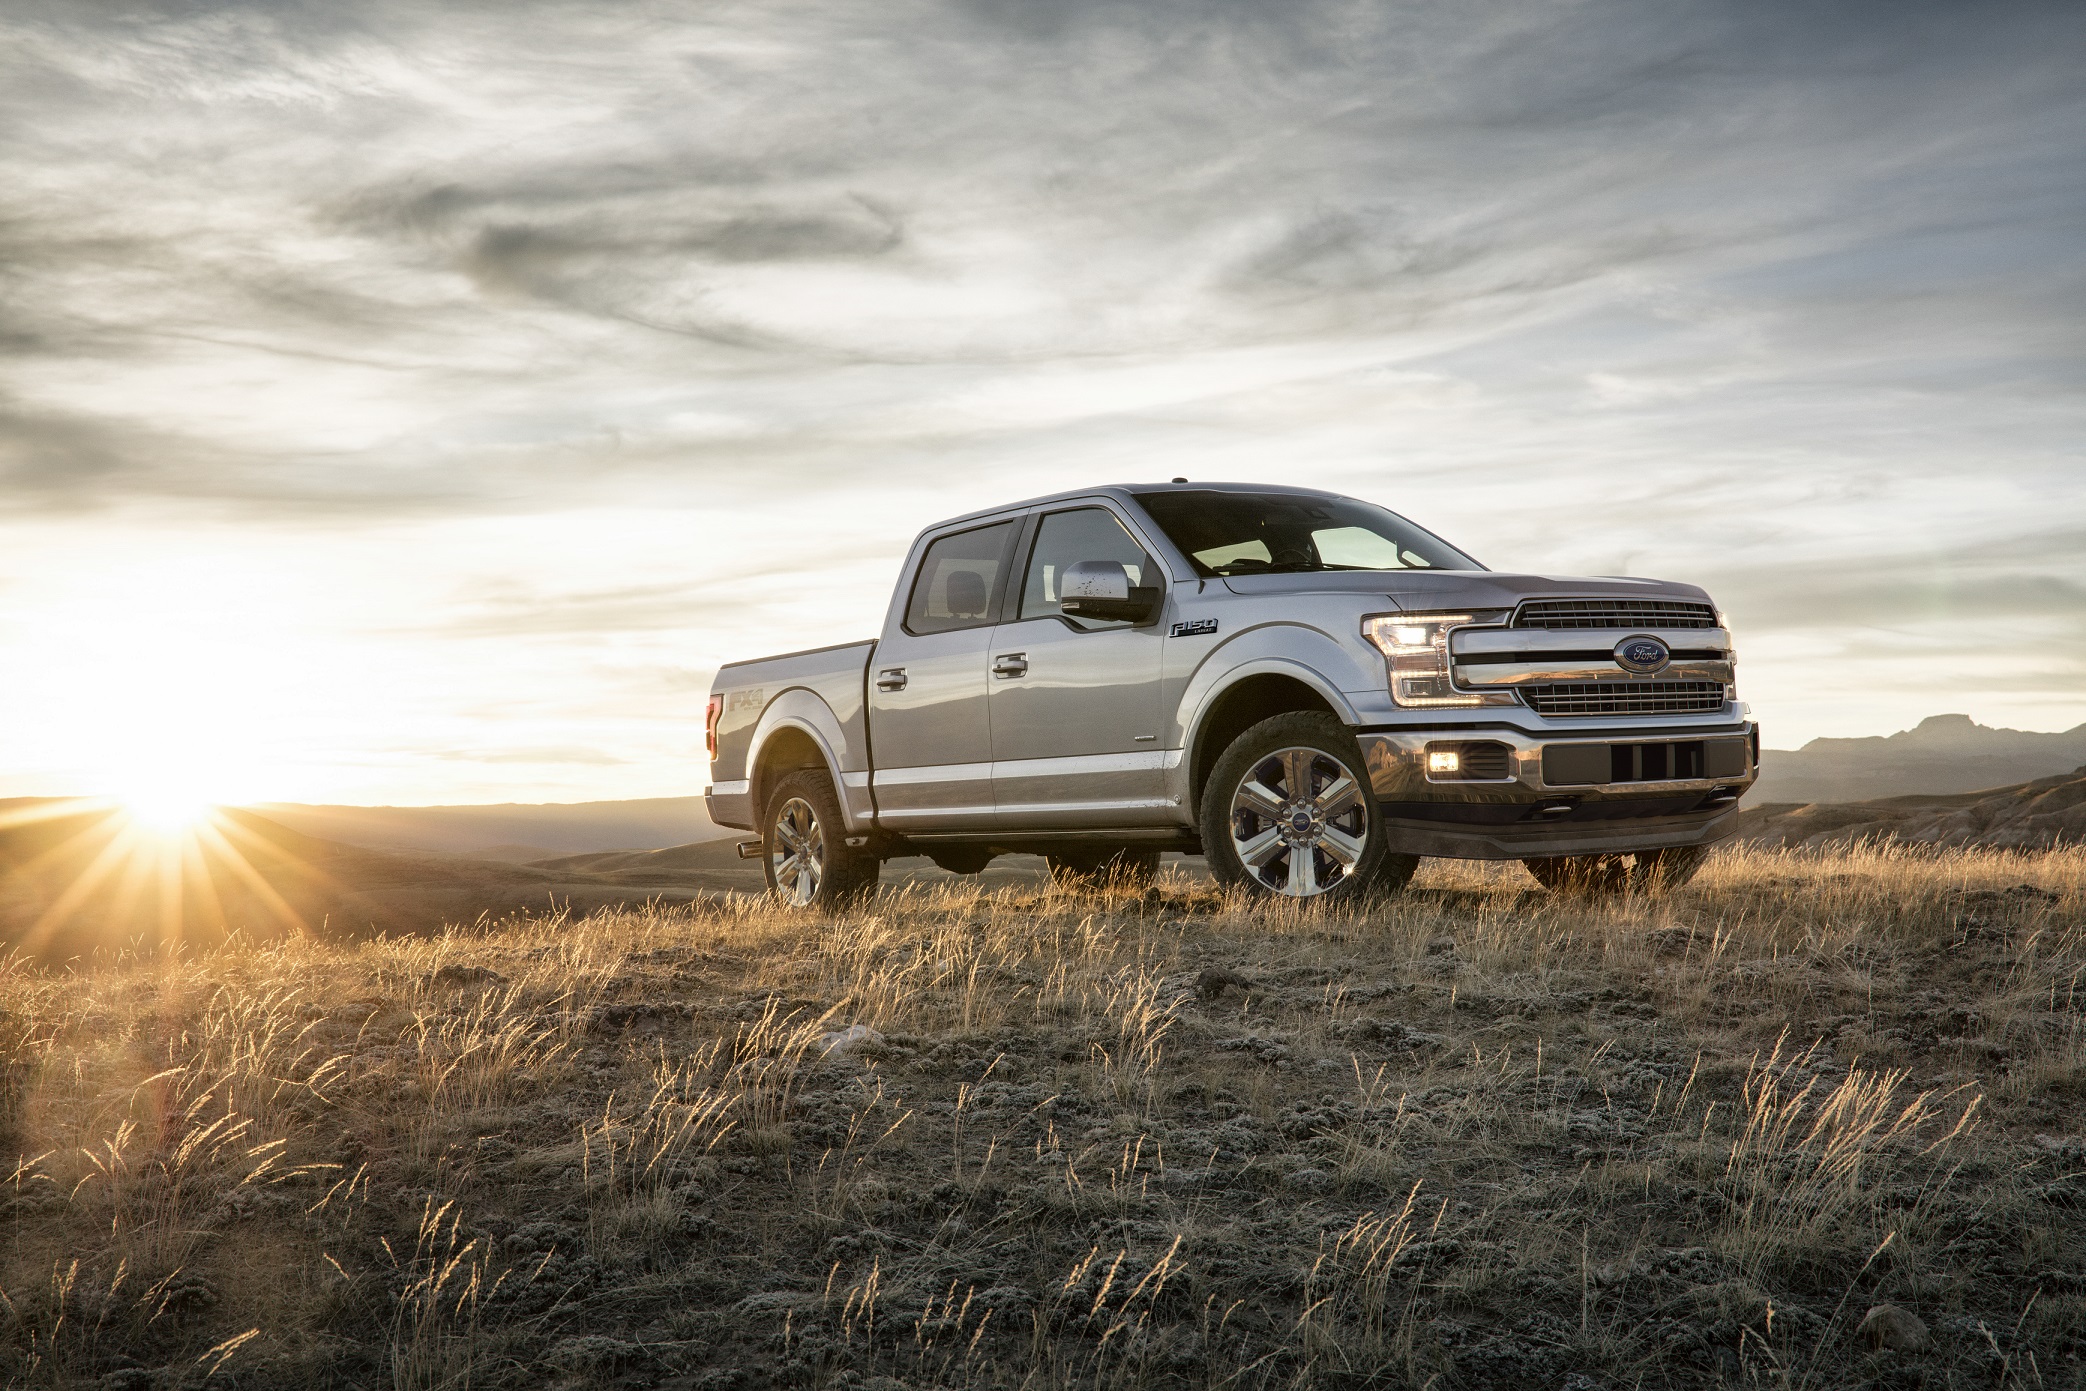 Ford Makes Impact with Major Announcements at Detroit Motorshow